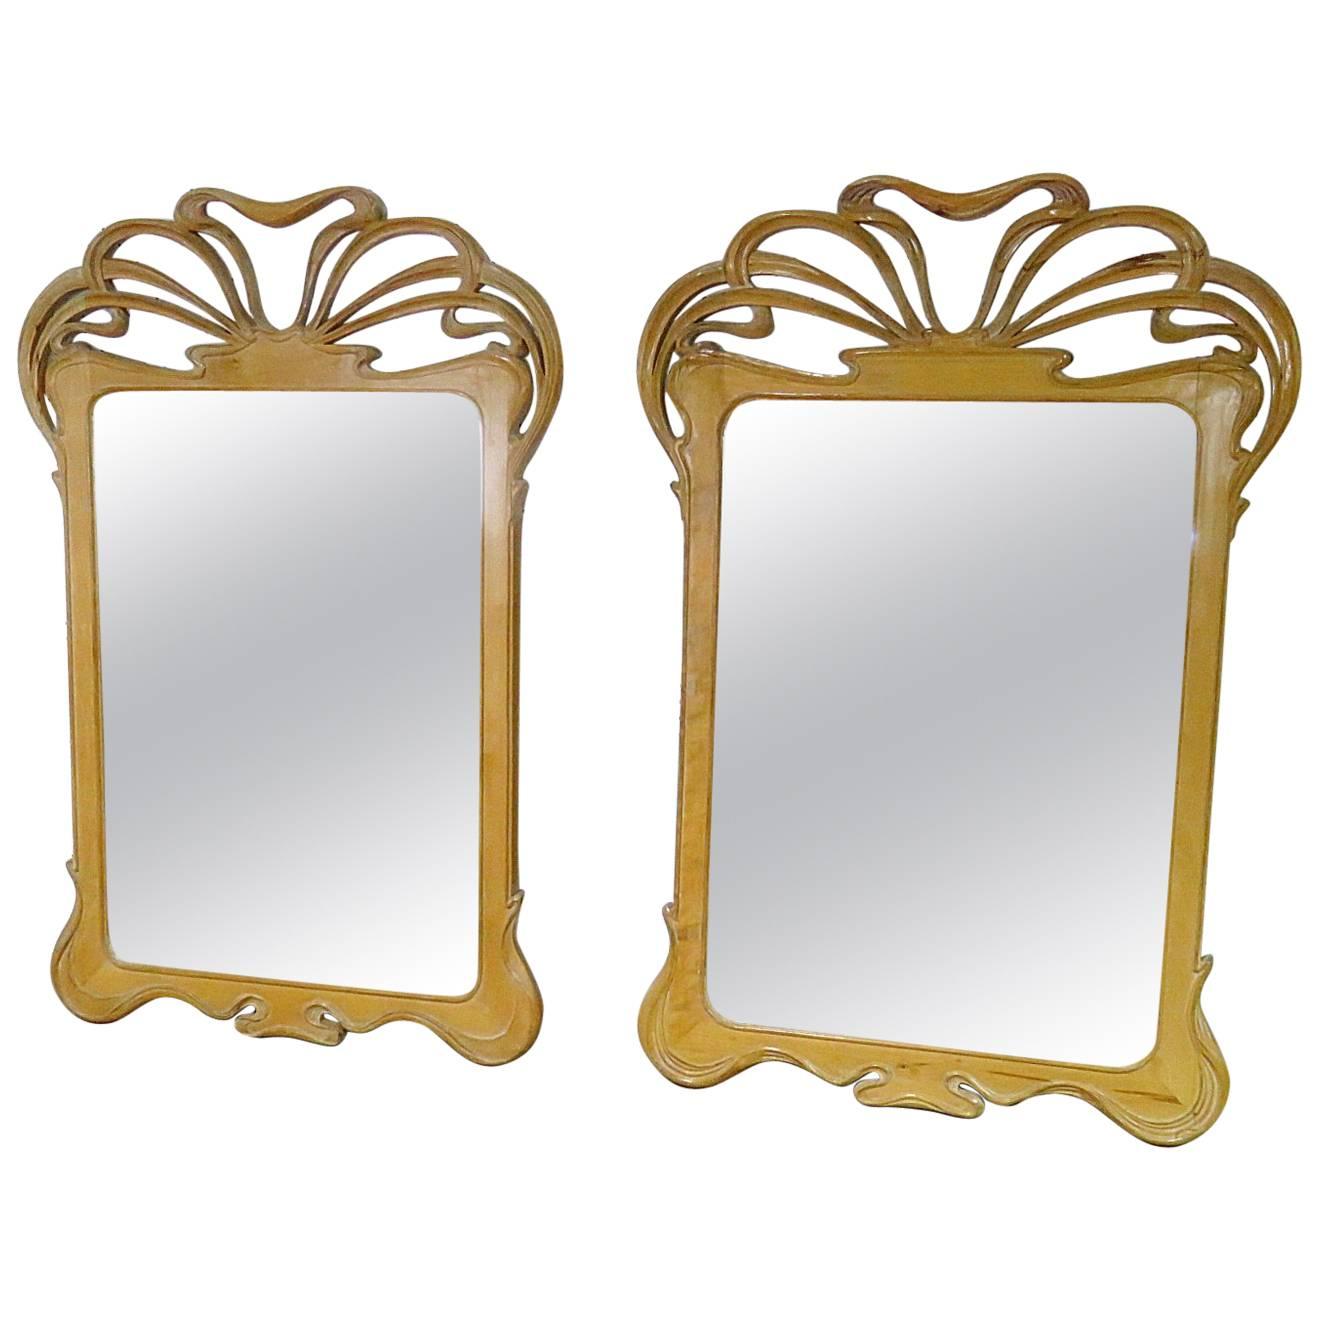 Pair of Nouveau Style Mirrors in the Manner of Majorelle